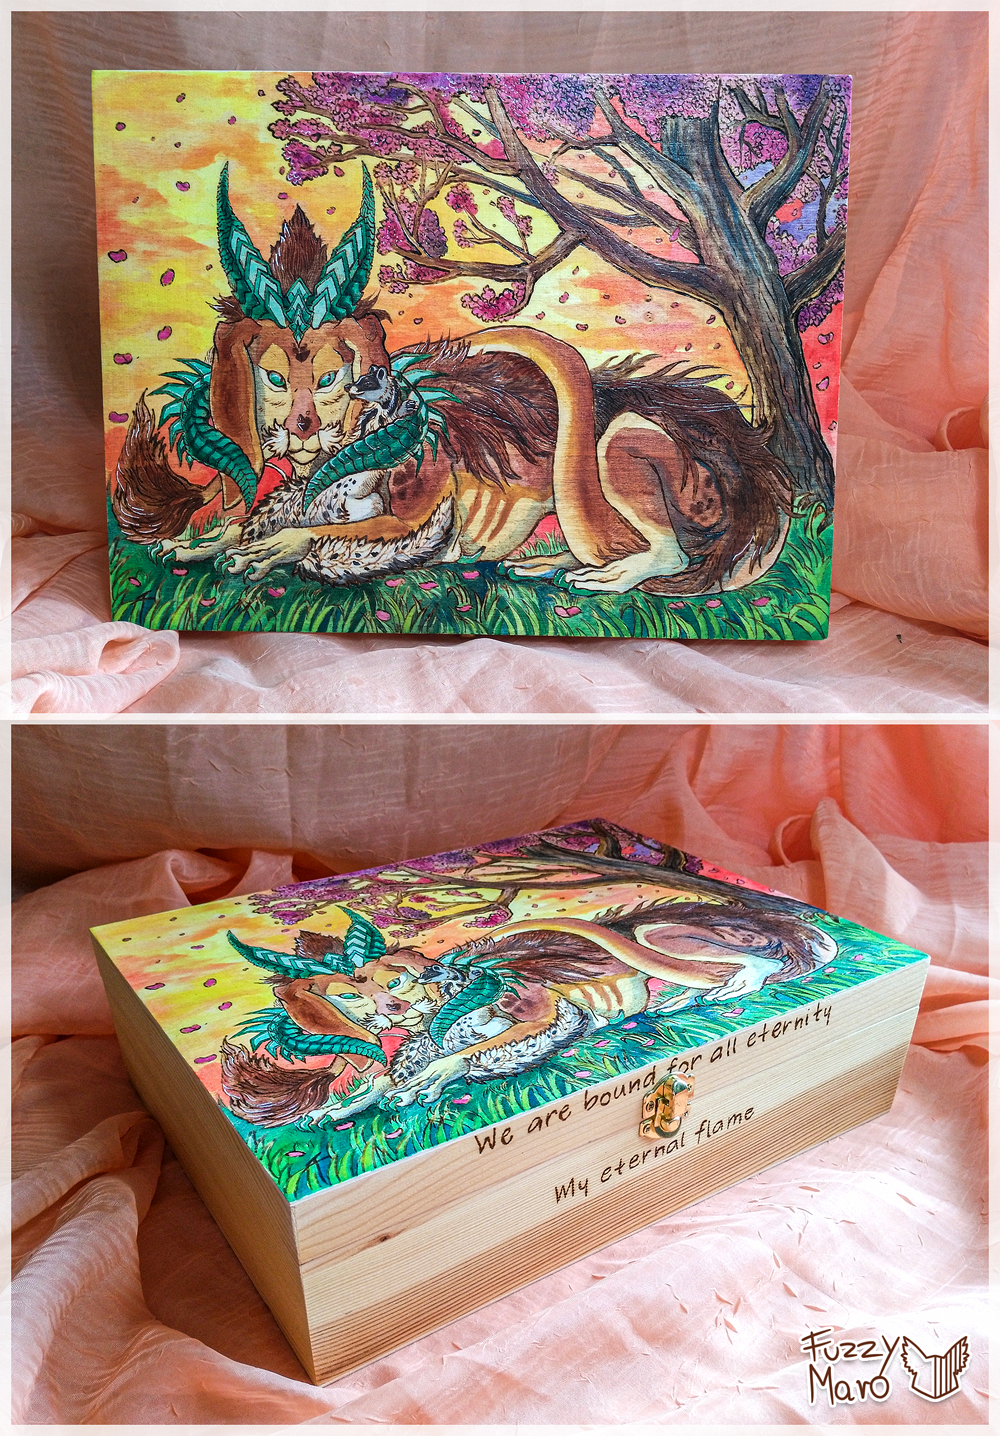 We are bound - Pyrography on wooden box